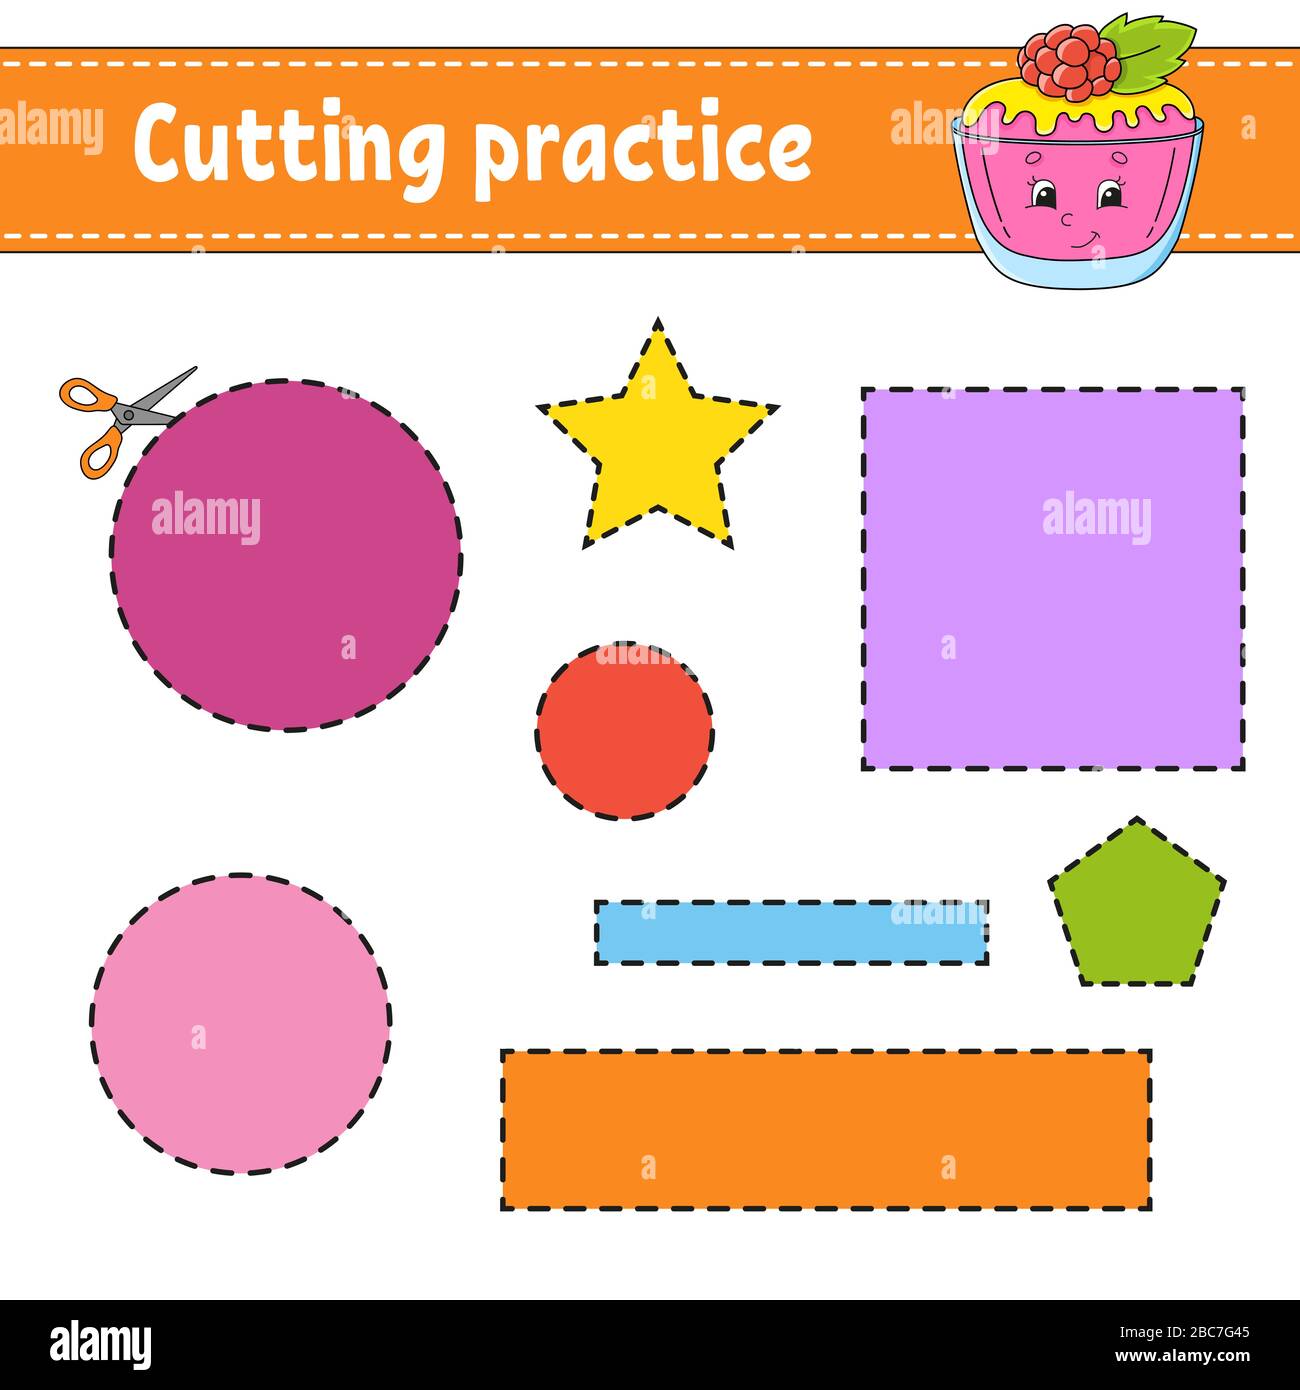 Fundamental paper education characters. Cutting Practice. Practice for Cutting. Cut Shape. Flowers Cutting Shape.